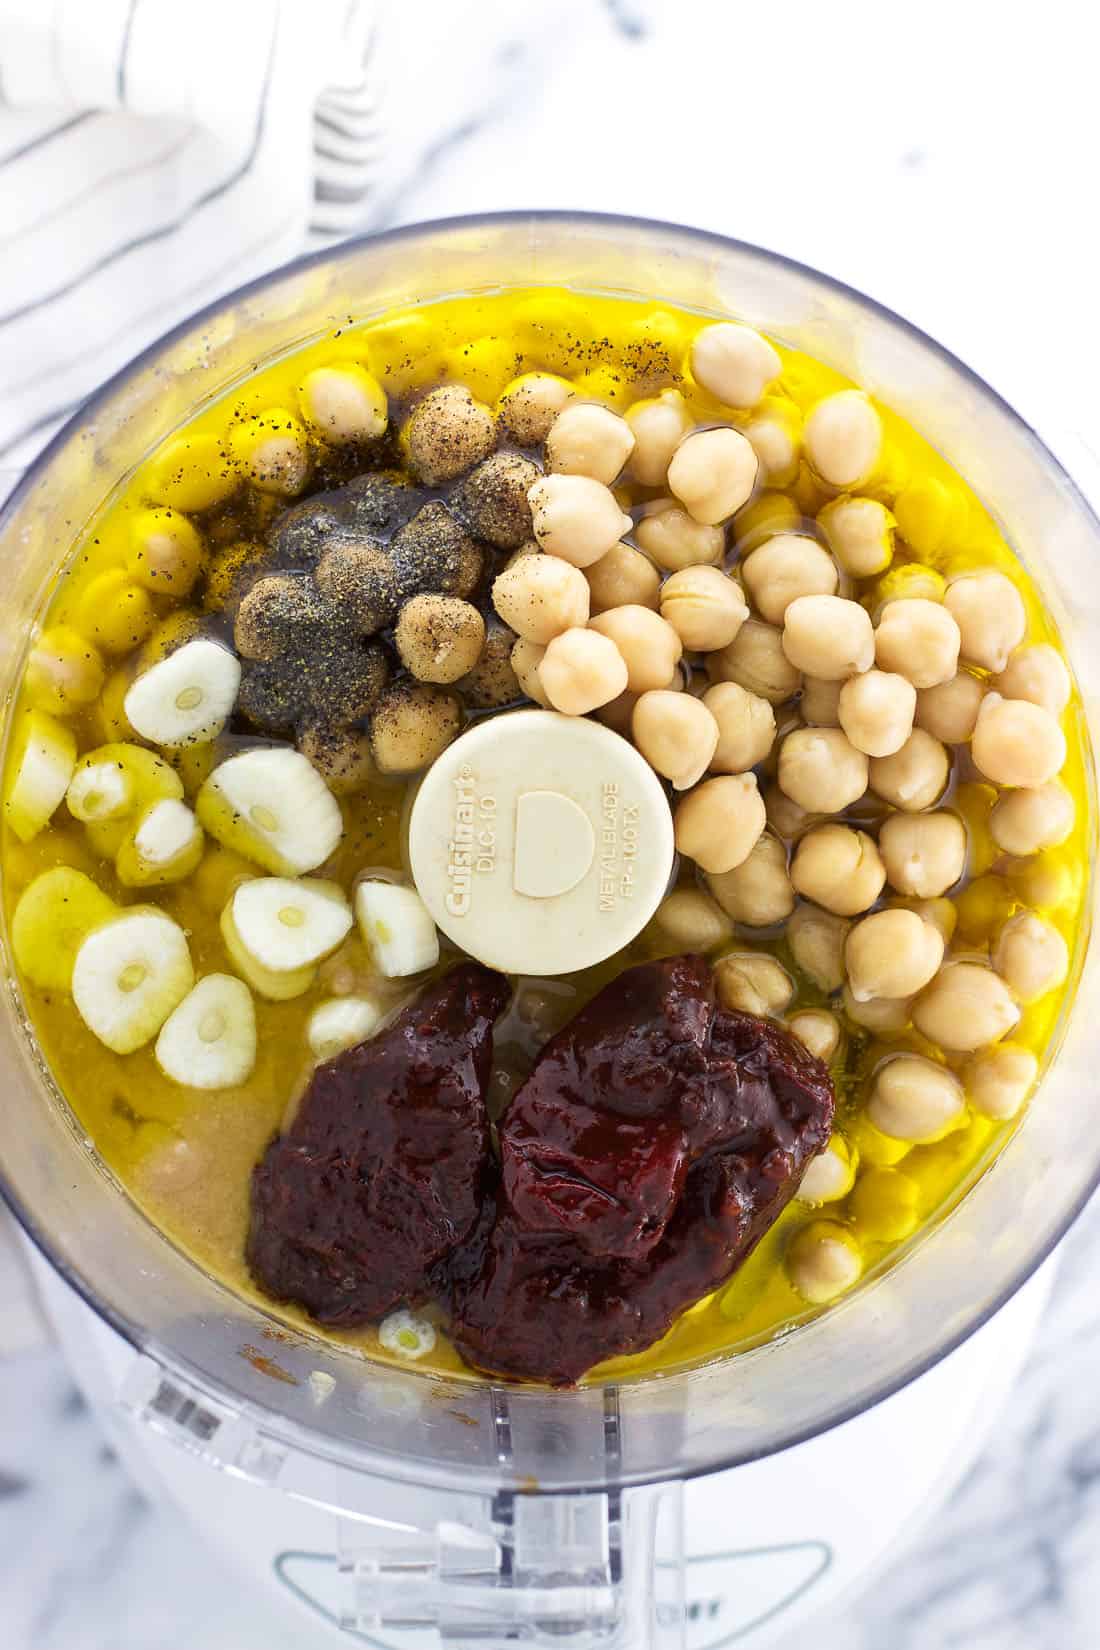 All of the ingredients in the bowl of a 7-cup food processor before blending